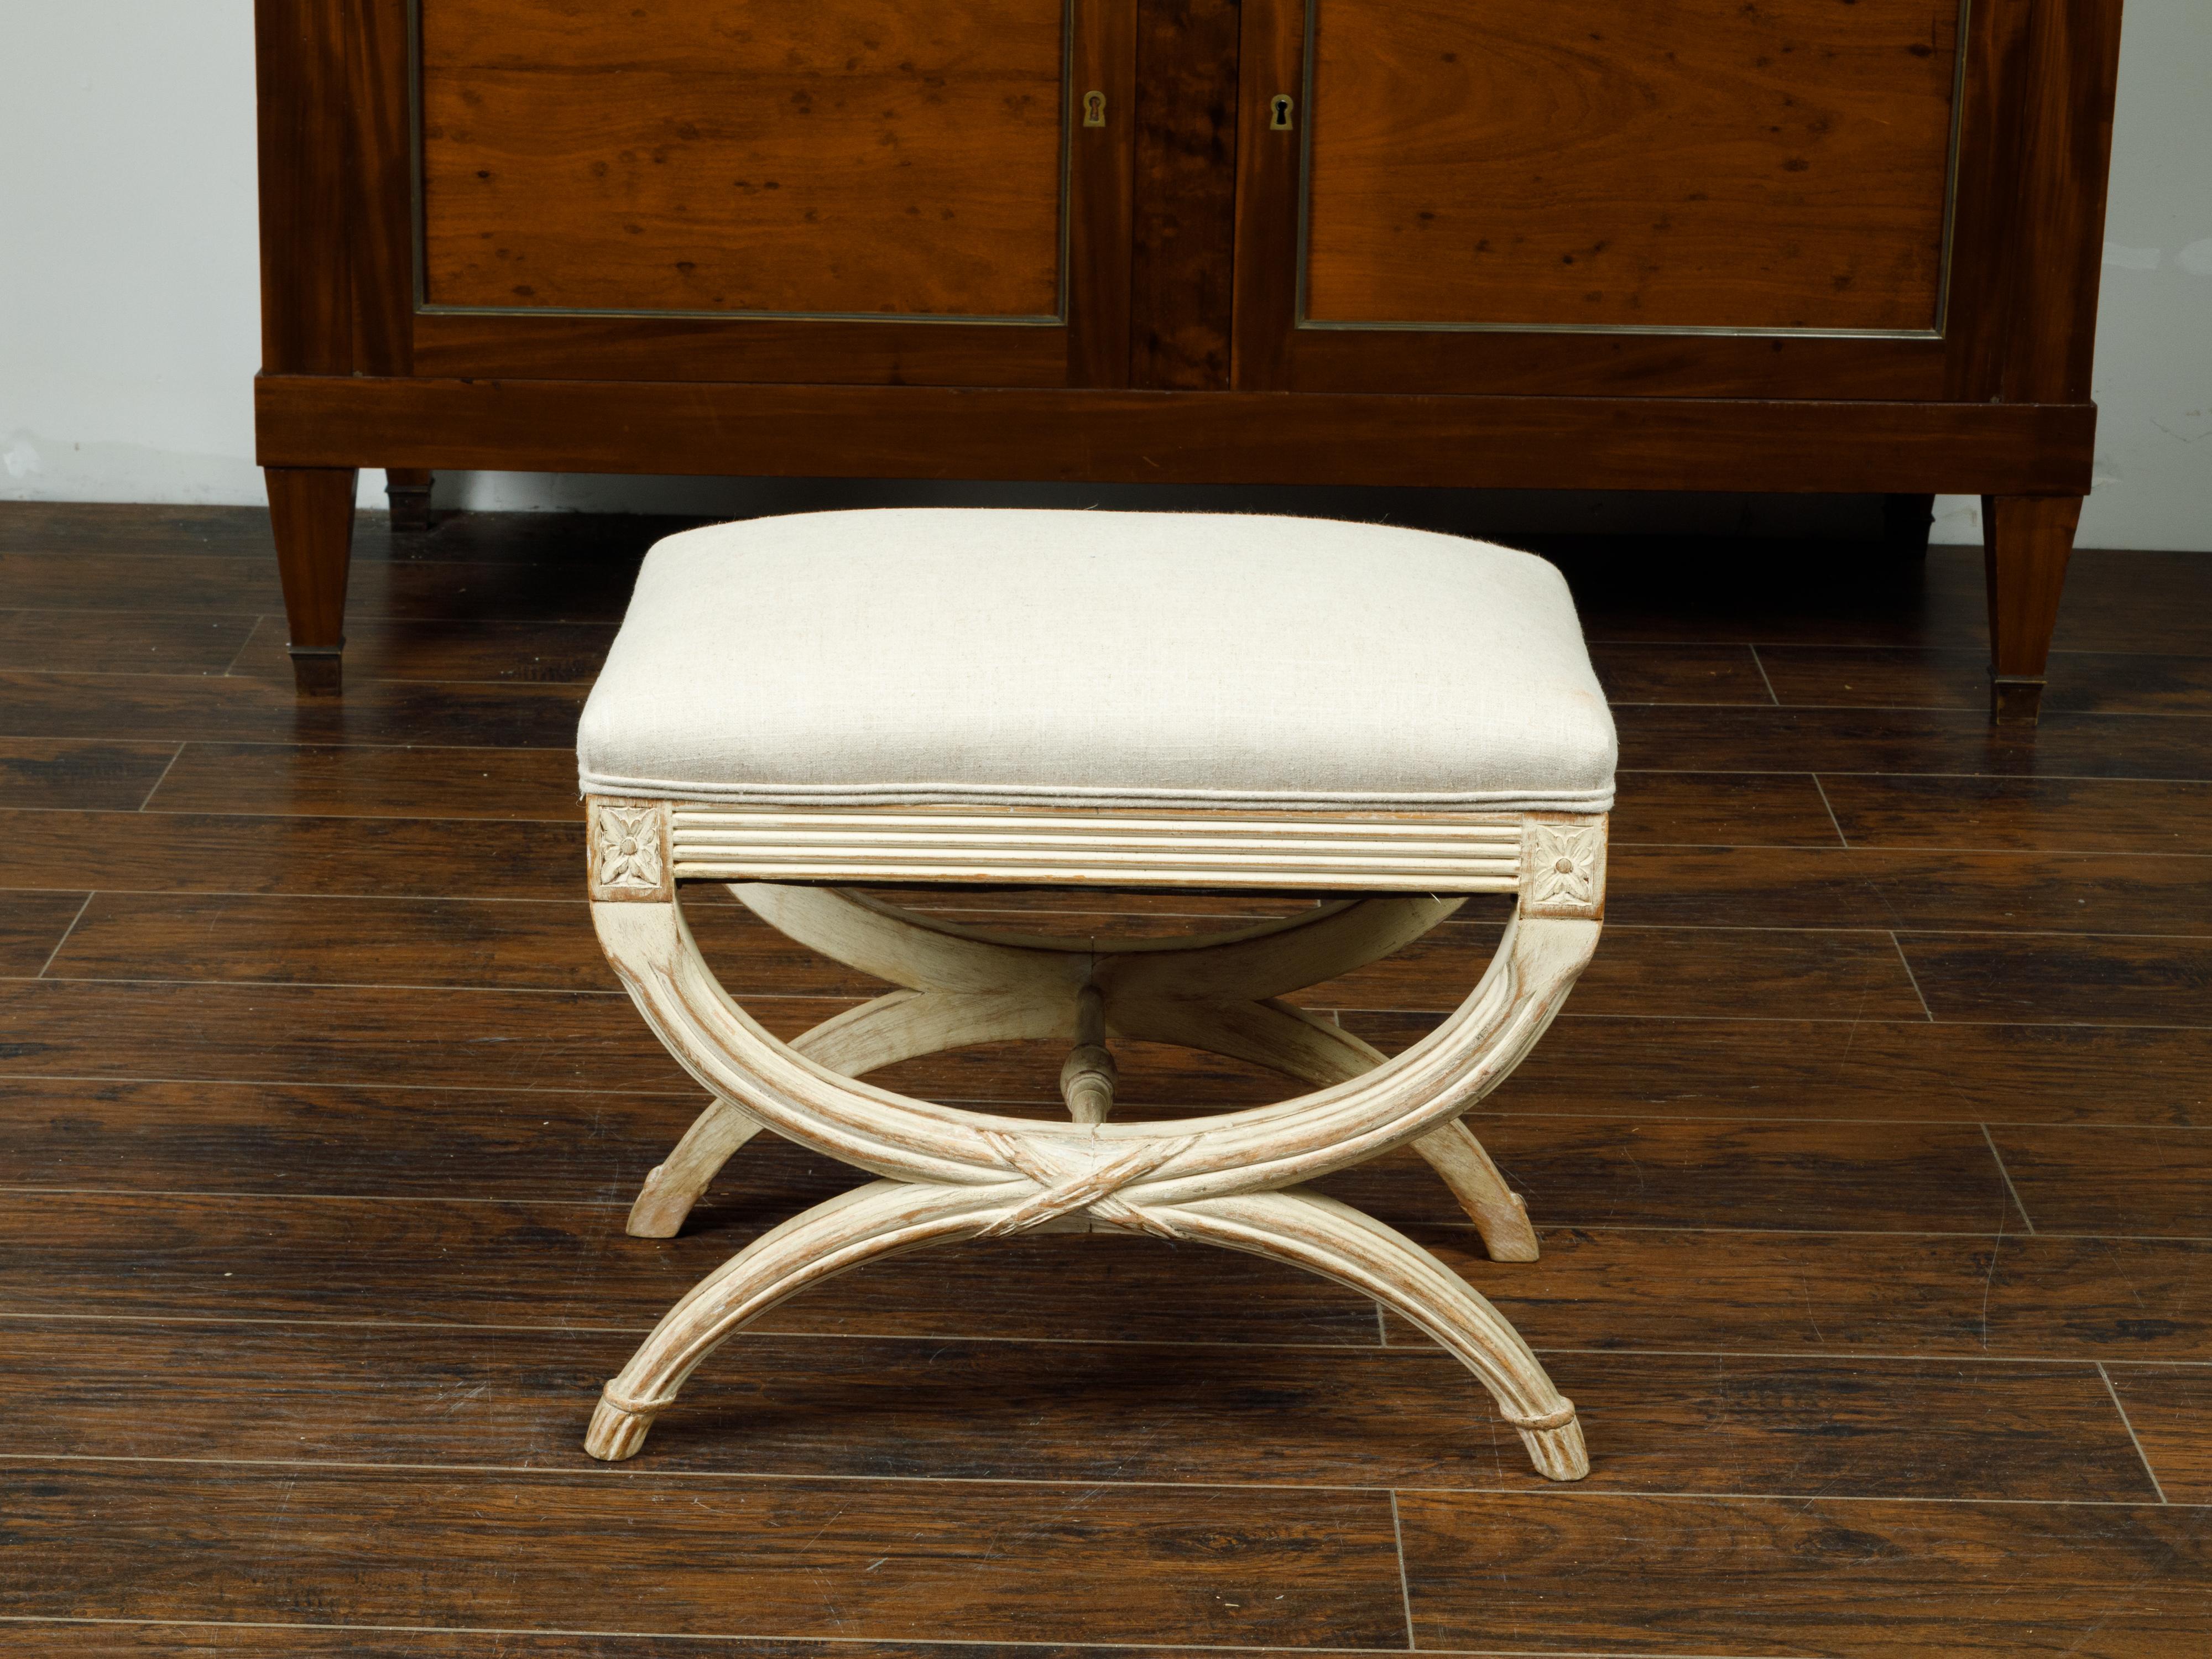 A French Empire style painted wood curule stool from the early 20th century, with carved rosettes and new upholstery. Created in France during the first quarter of the 20th century, this painted stool features a rectangular seat newly recovered with